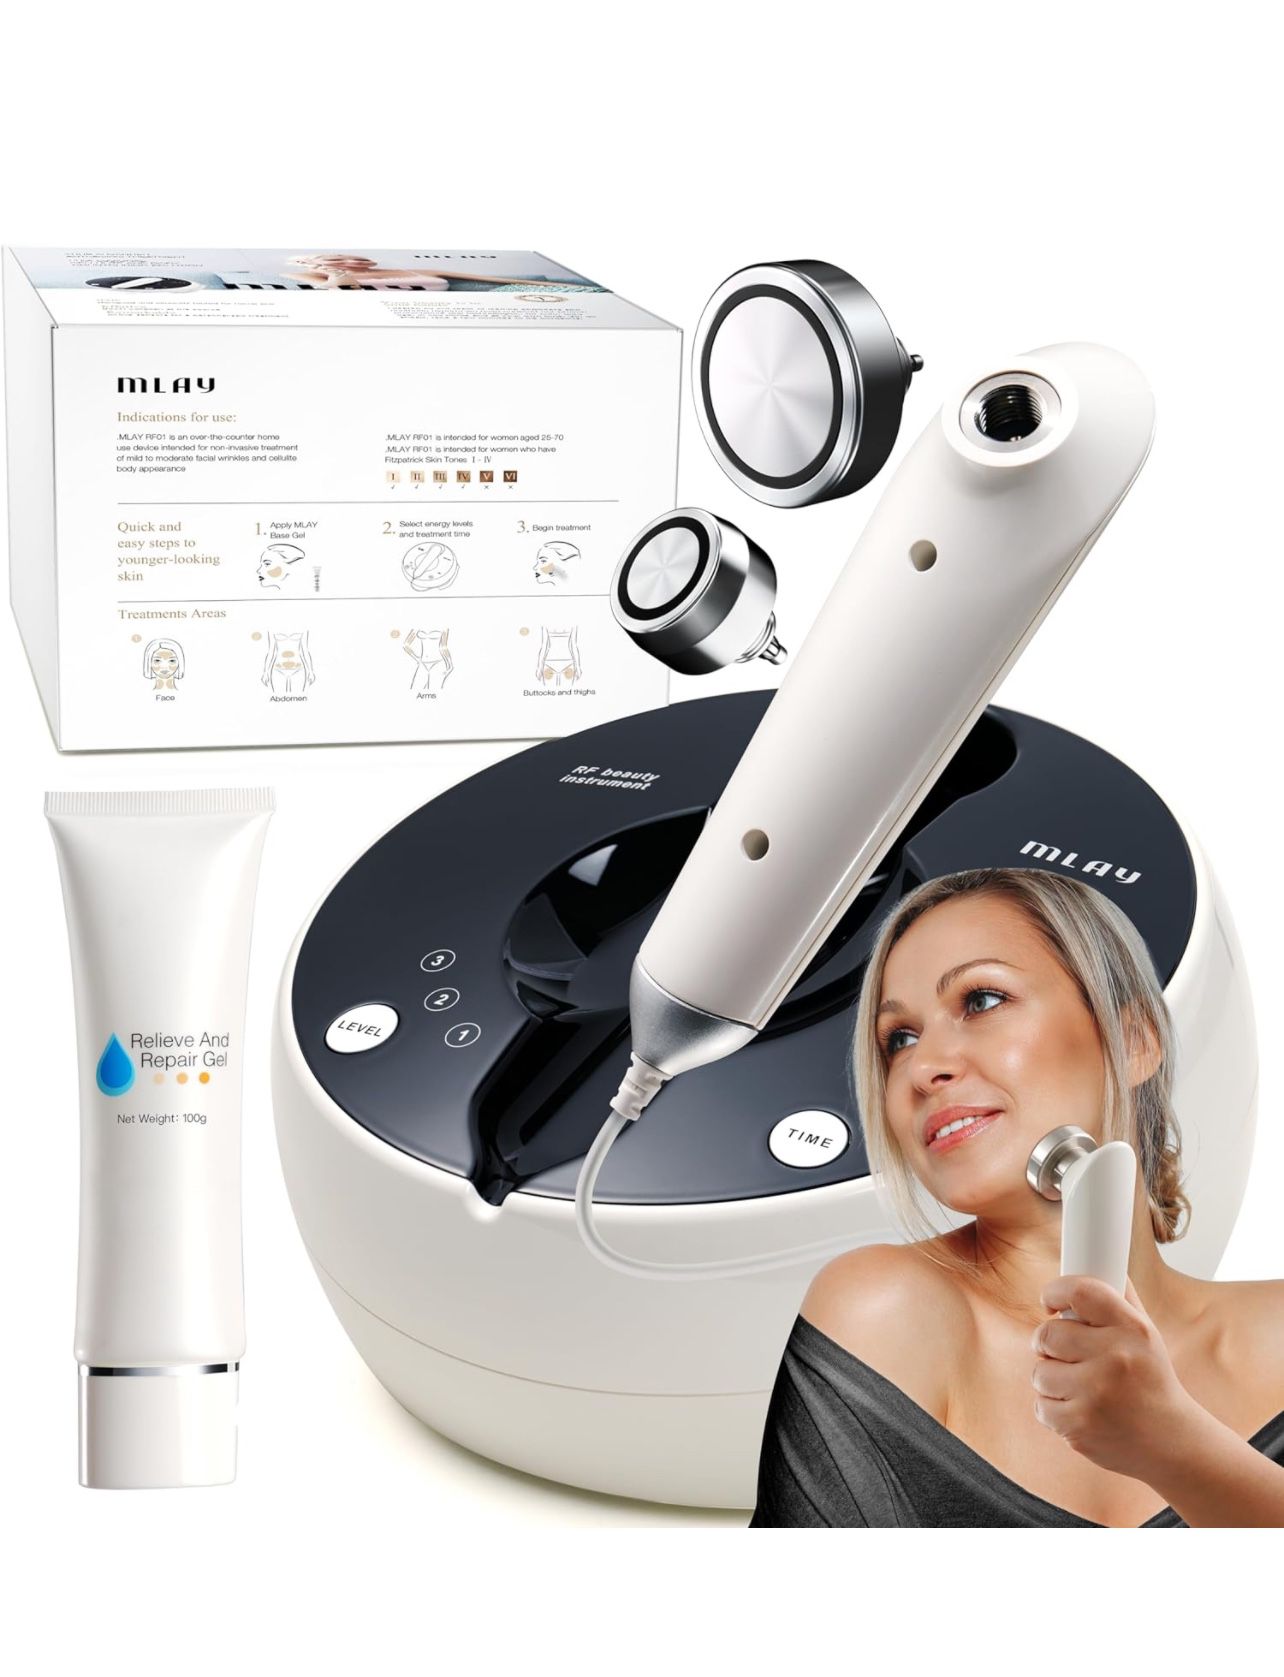 RF Beauty Device | Home RF Lifting | Wrinkle Removal | Anti Aging | Skin Care - Increase Collagen & Absorption - MLAY Professional Radio Frequency Ski